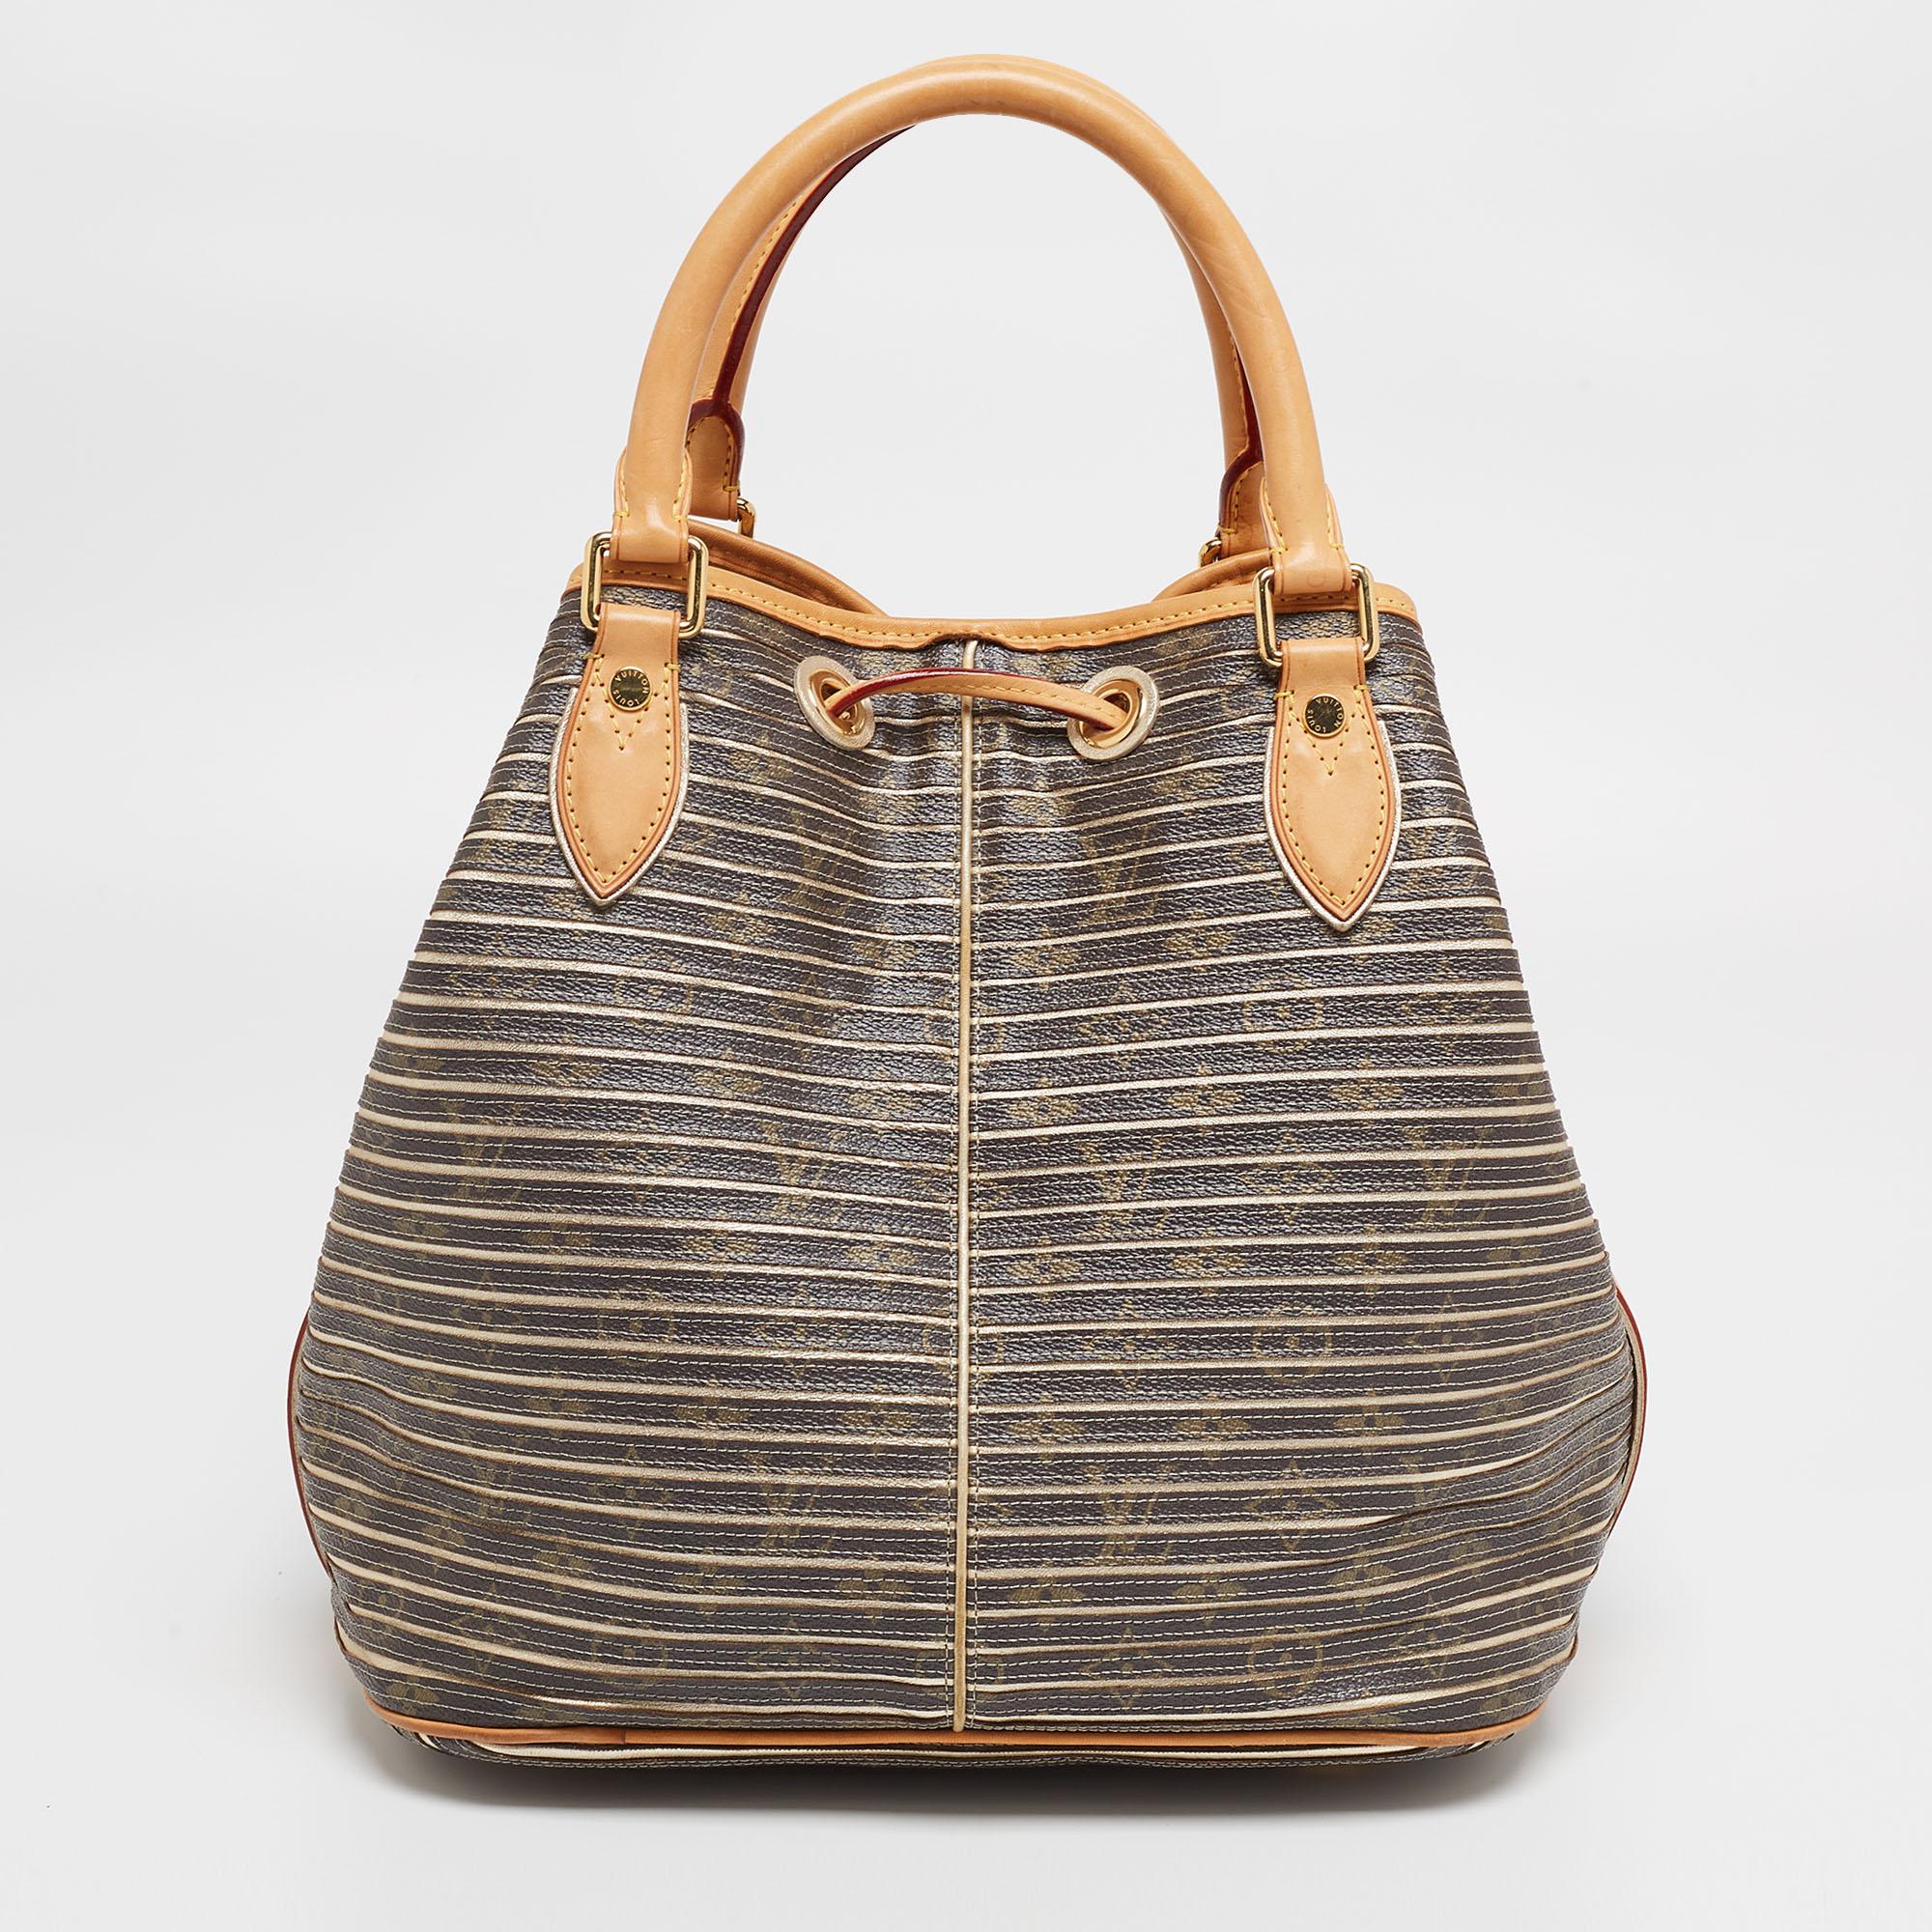 Radiate with classic style when you swing this Limited Edition Eden Neo bag from Louis Vuitton. Beautifully crafted from argent monogram canvas, and designed with a tassel charm on the front, this piece is a beauty. The drawstring opens to a